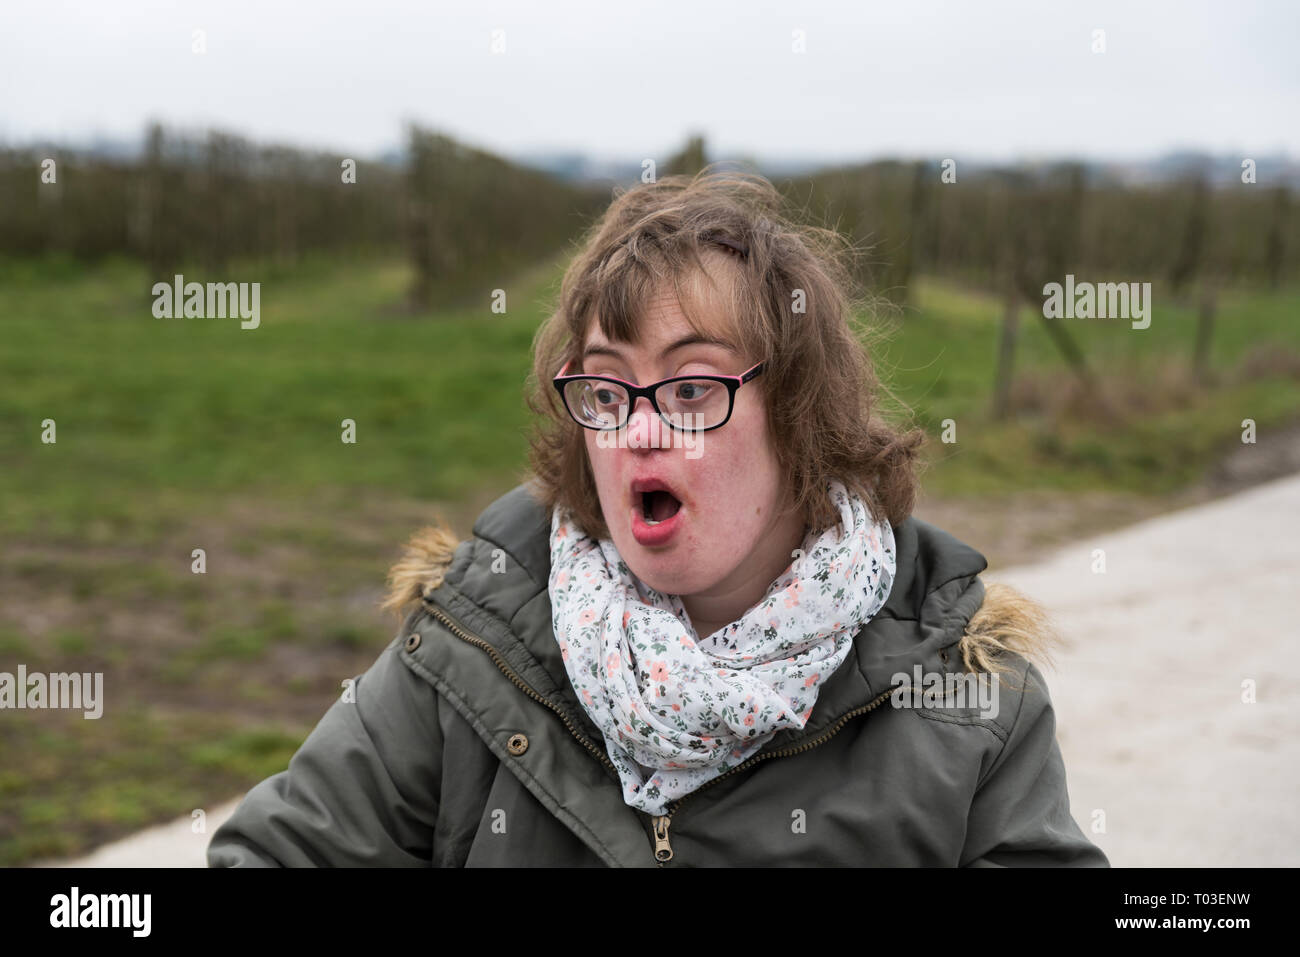 Hakendover, Flanders / Belgium - 03 02 2019: Portrait of a happy white woman with Down Syndrome and myopia Stock Photo